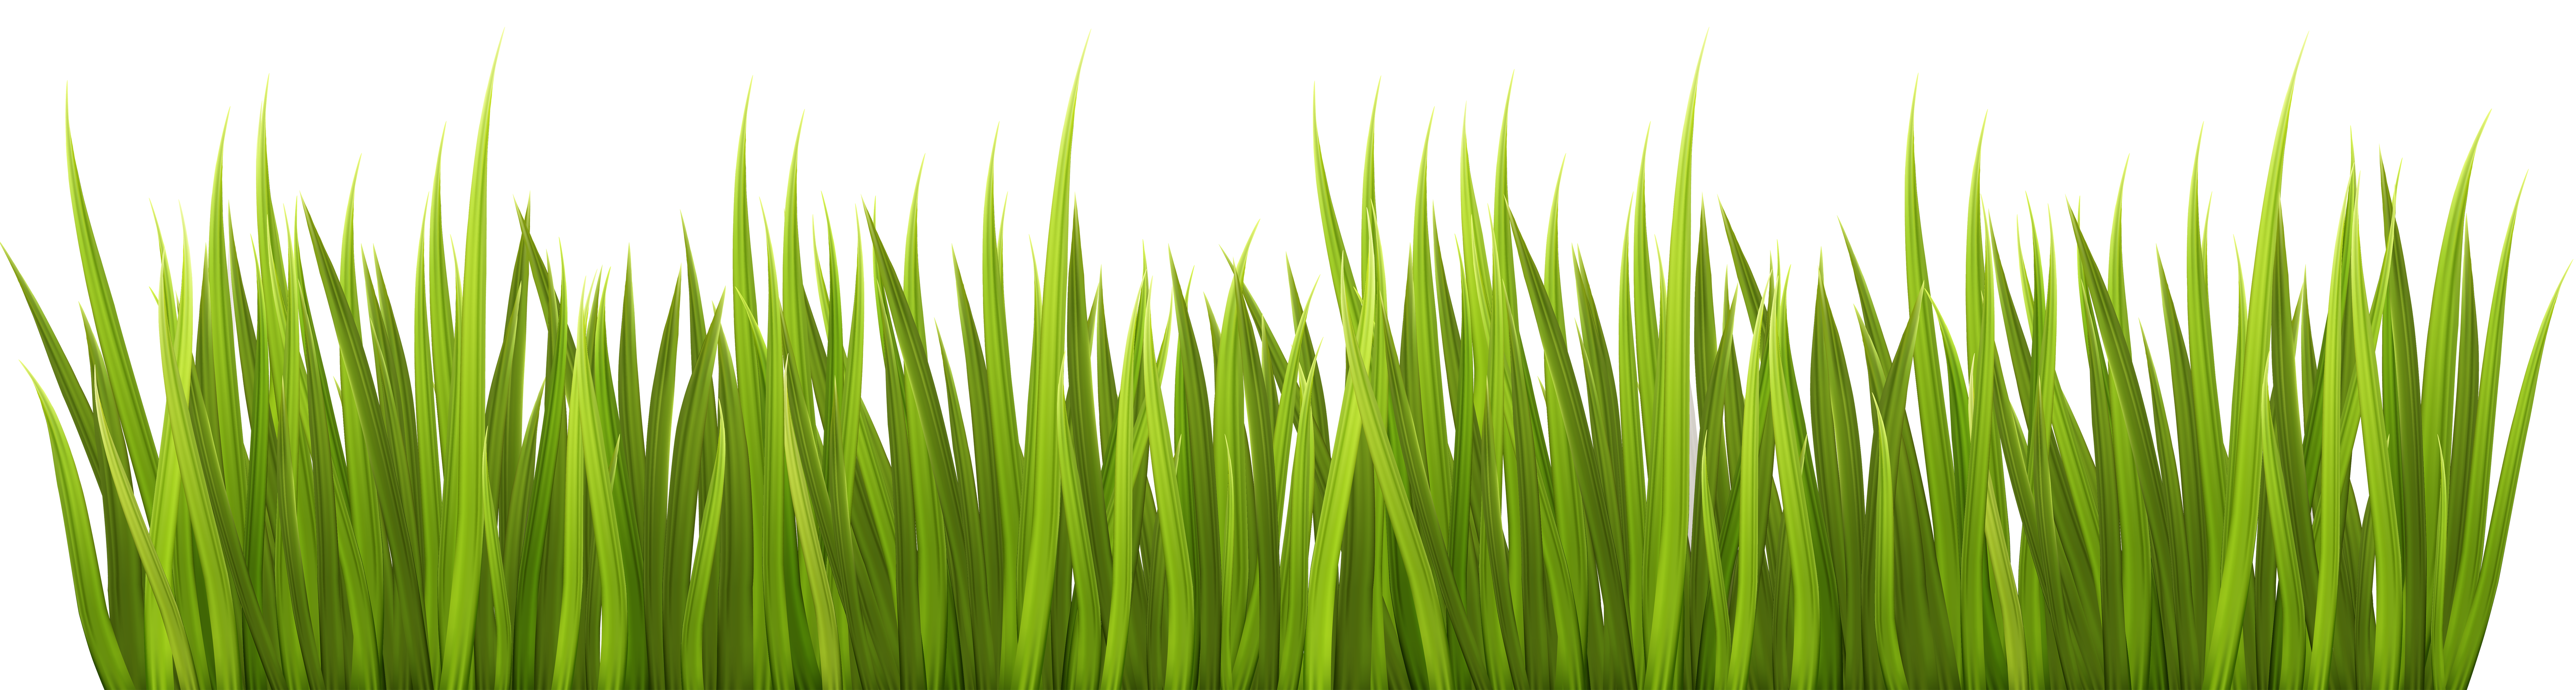 free grass pictures clip art - photo #24